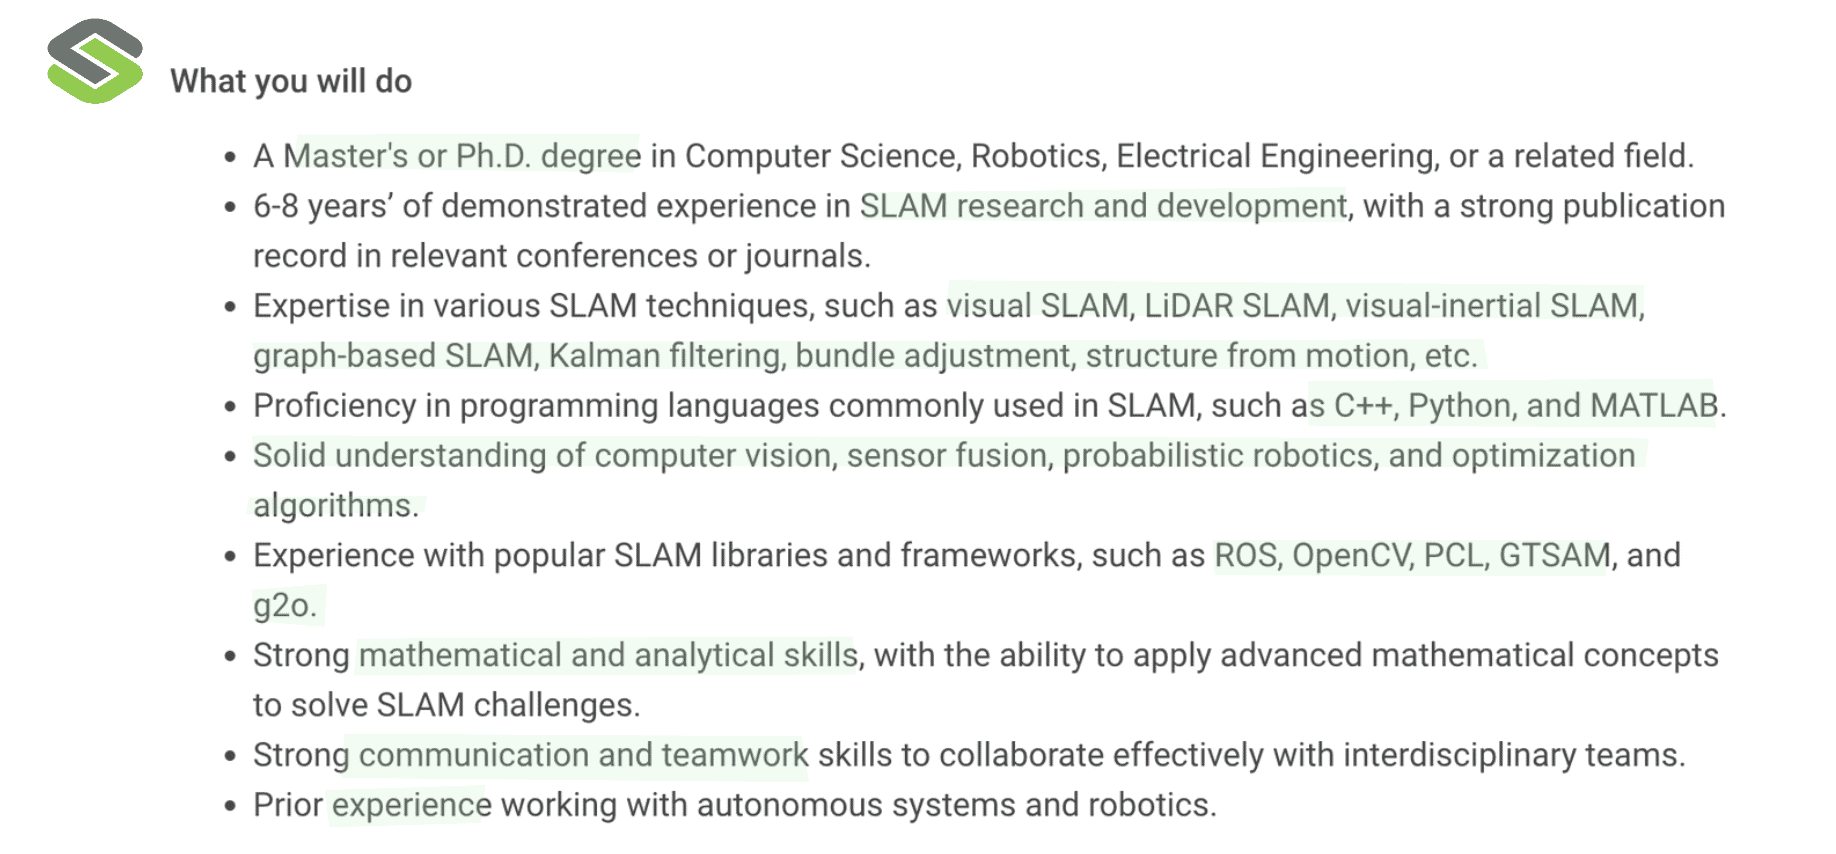 SLAM Roadmap: Which skills are needed to become a SLAM Engineer?